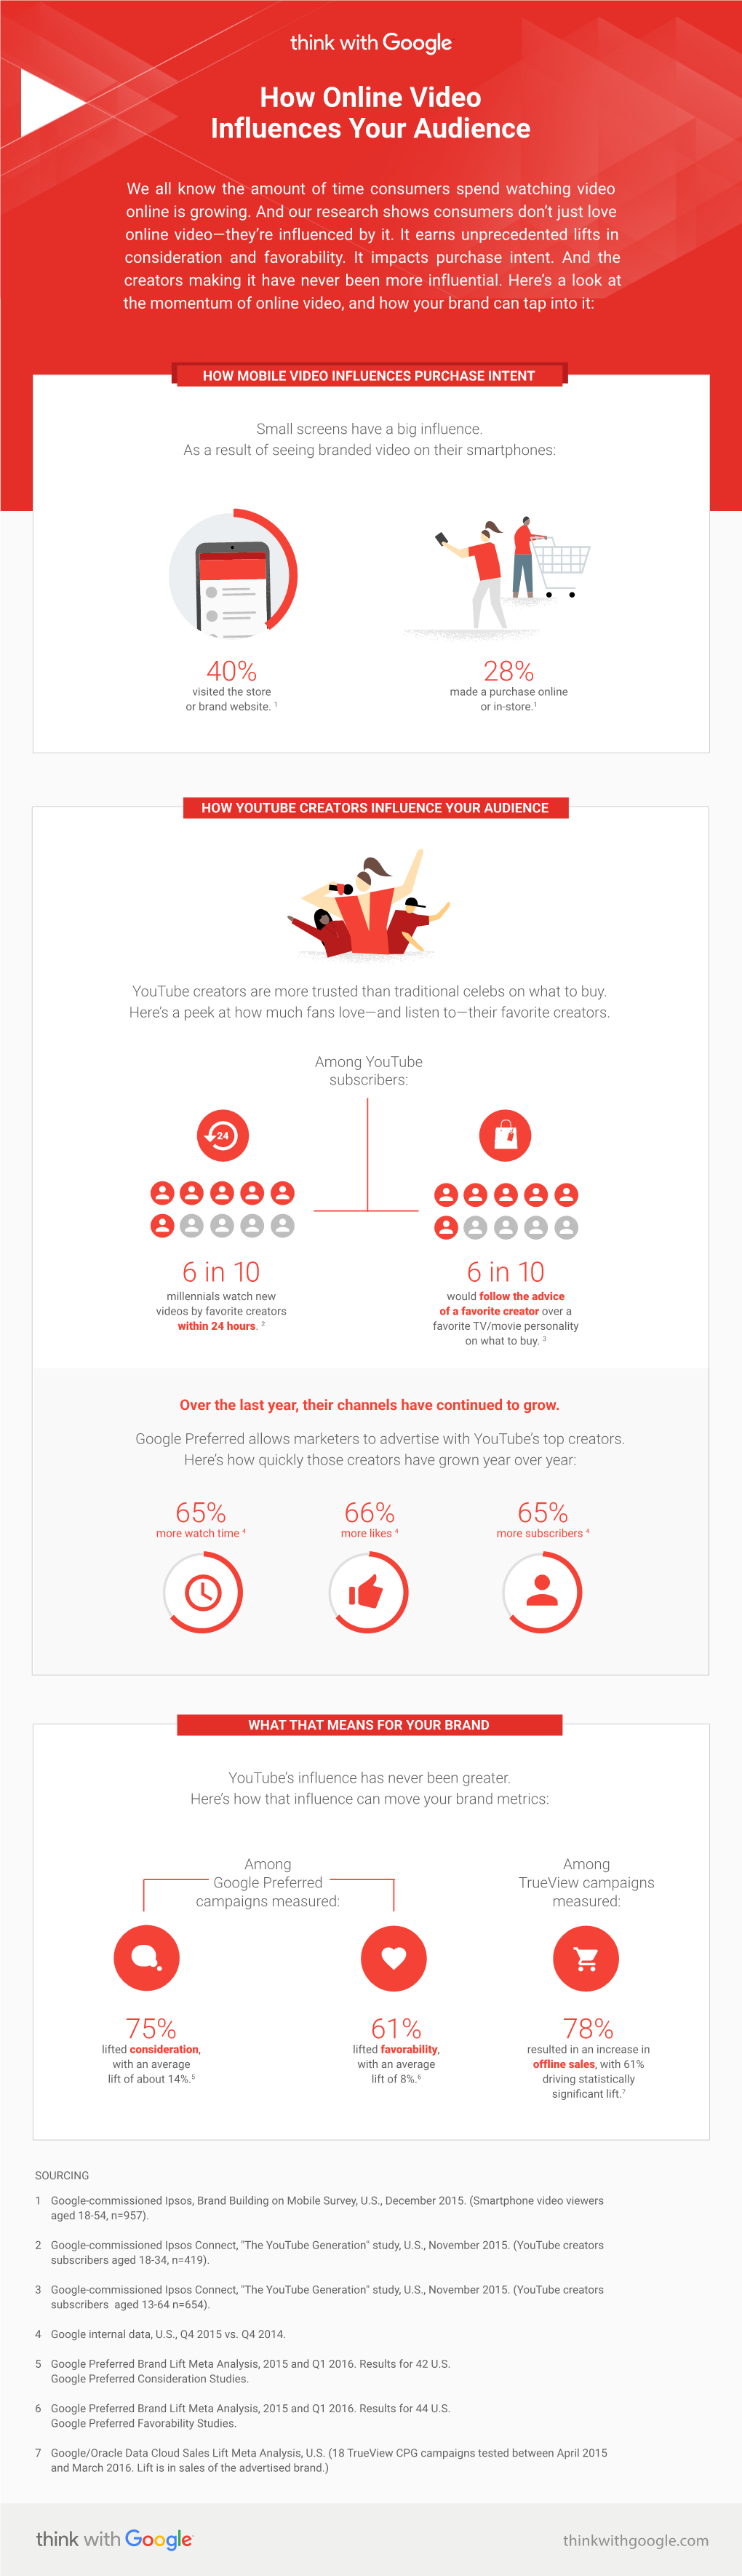 6 in 10 65% 65% 66% 75% 78% 61% How Online Video Influences Your